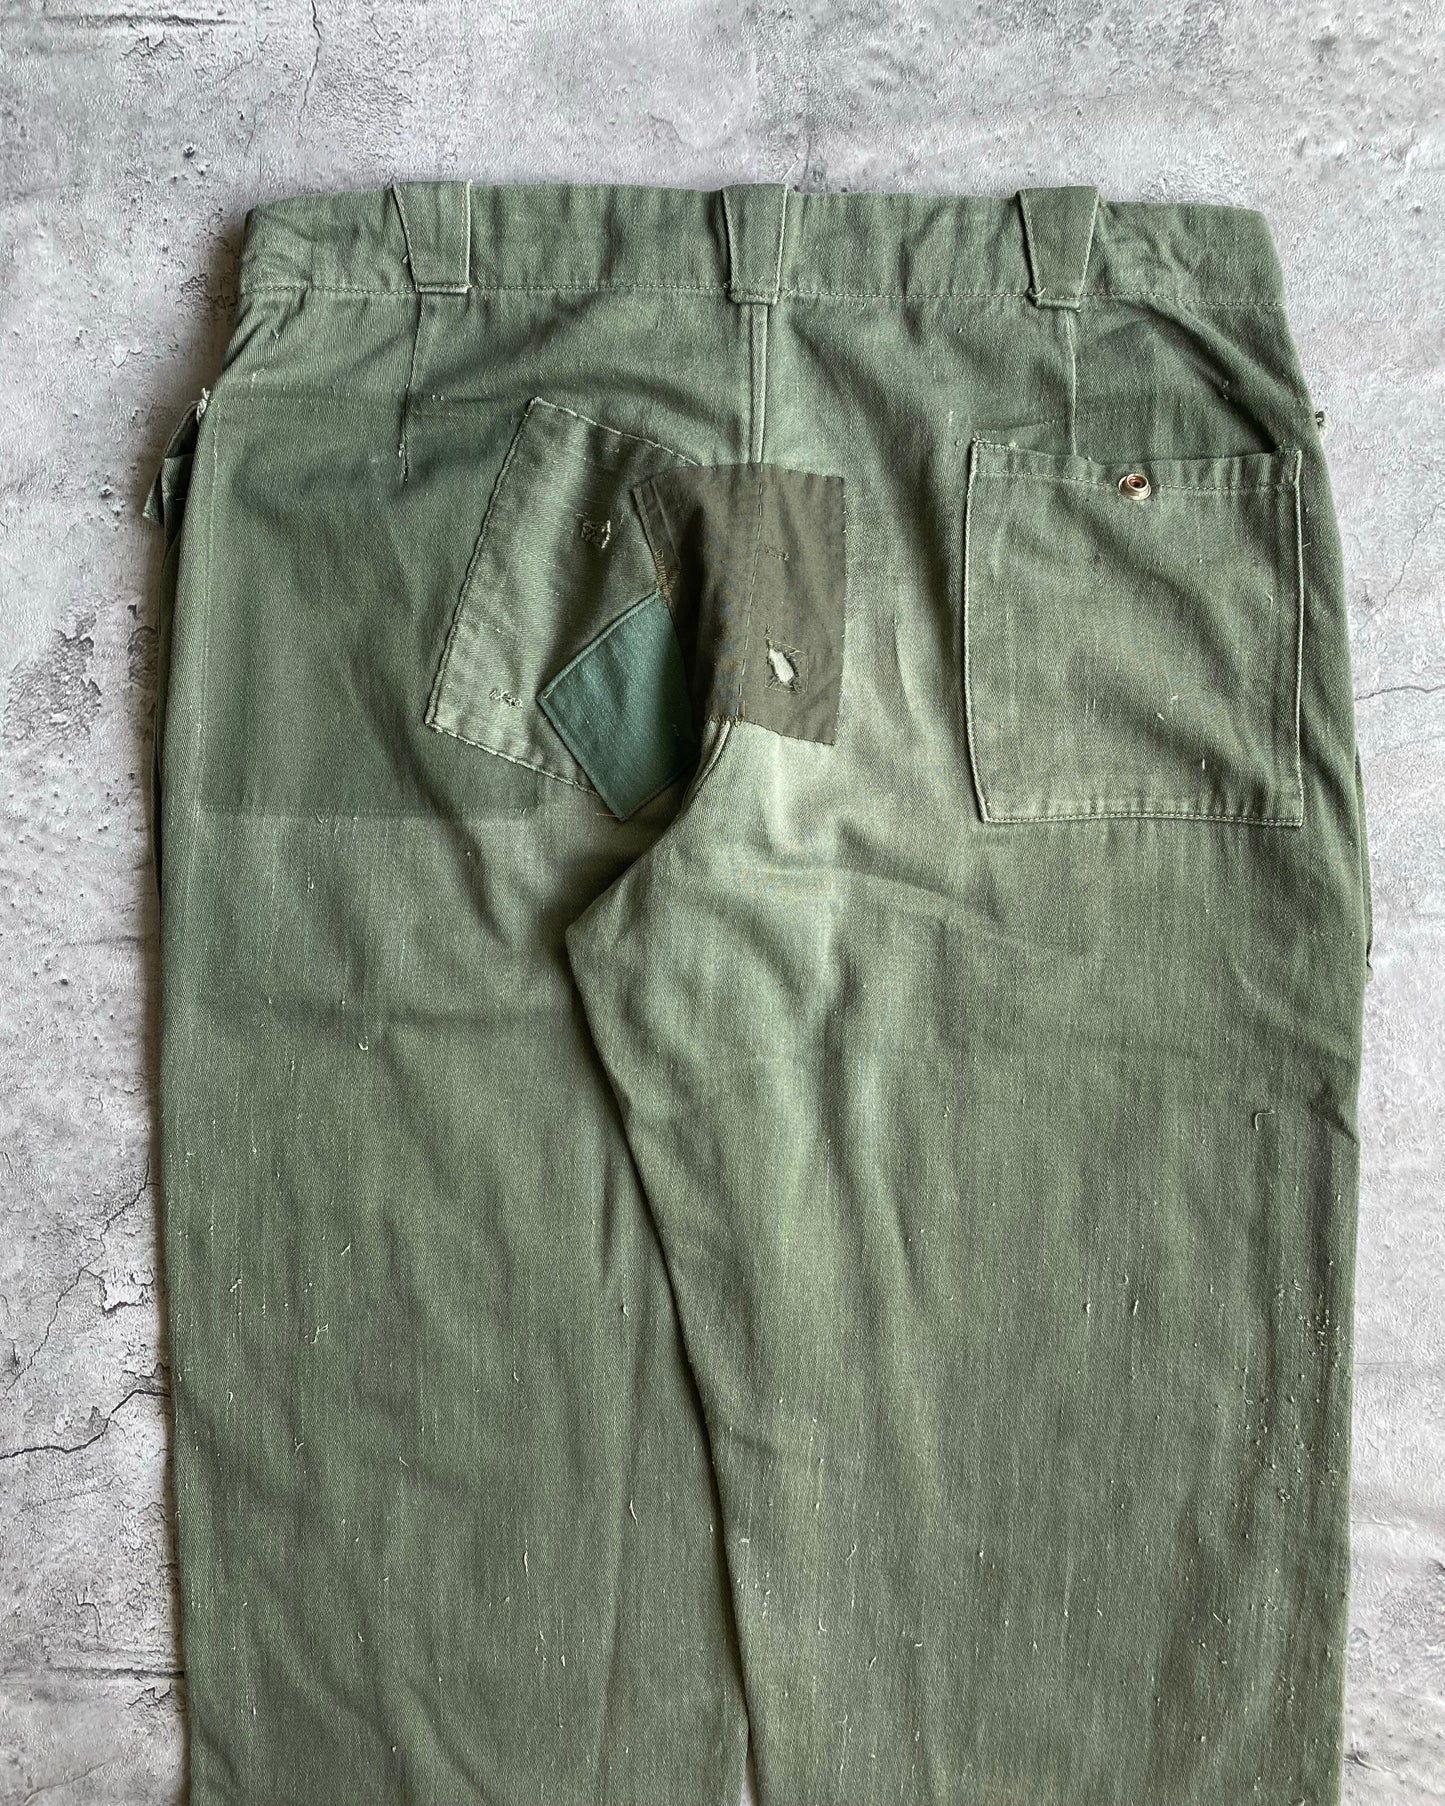 1970S FRANCE ARMY PATCHED WORK TROUSERS (36x28)